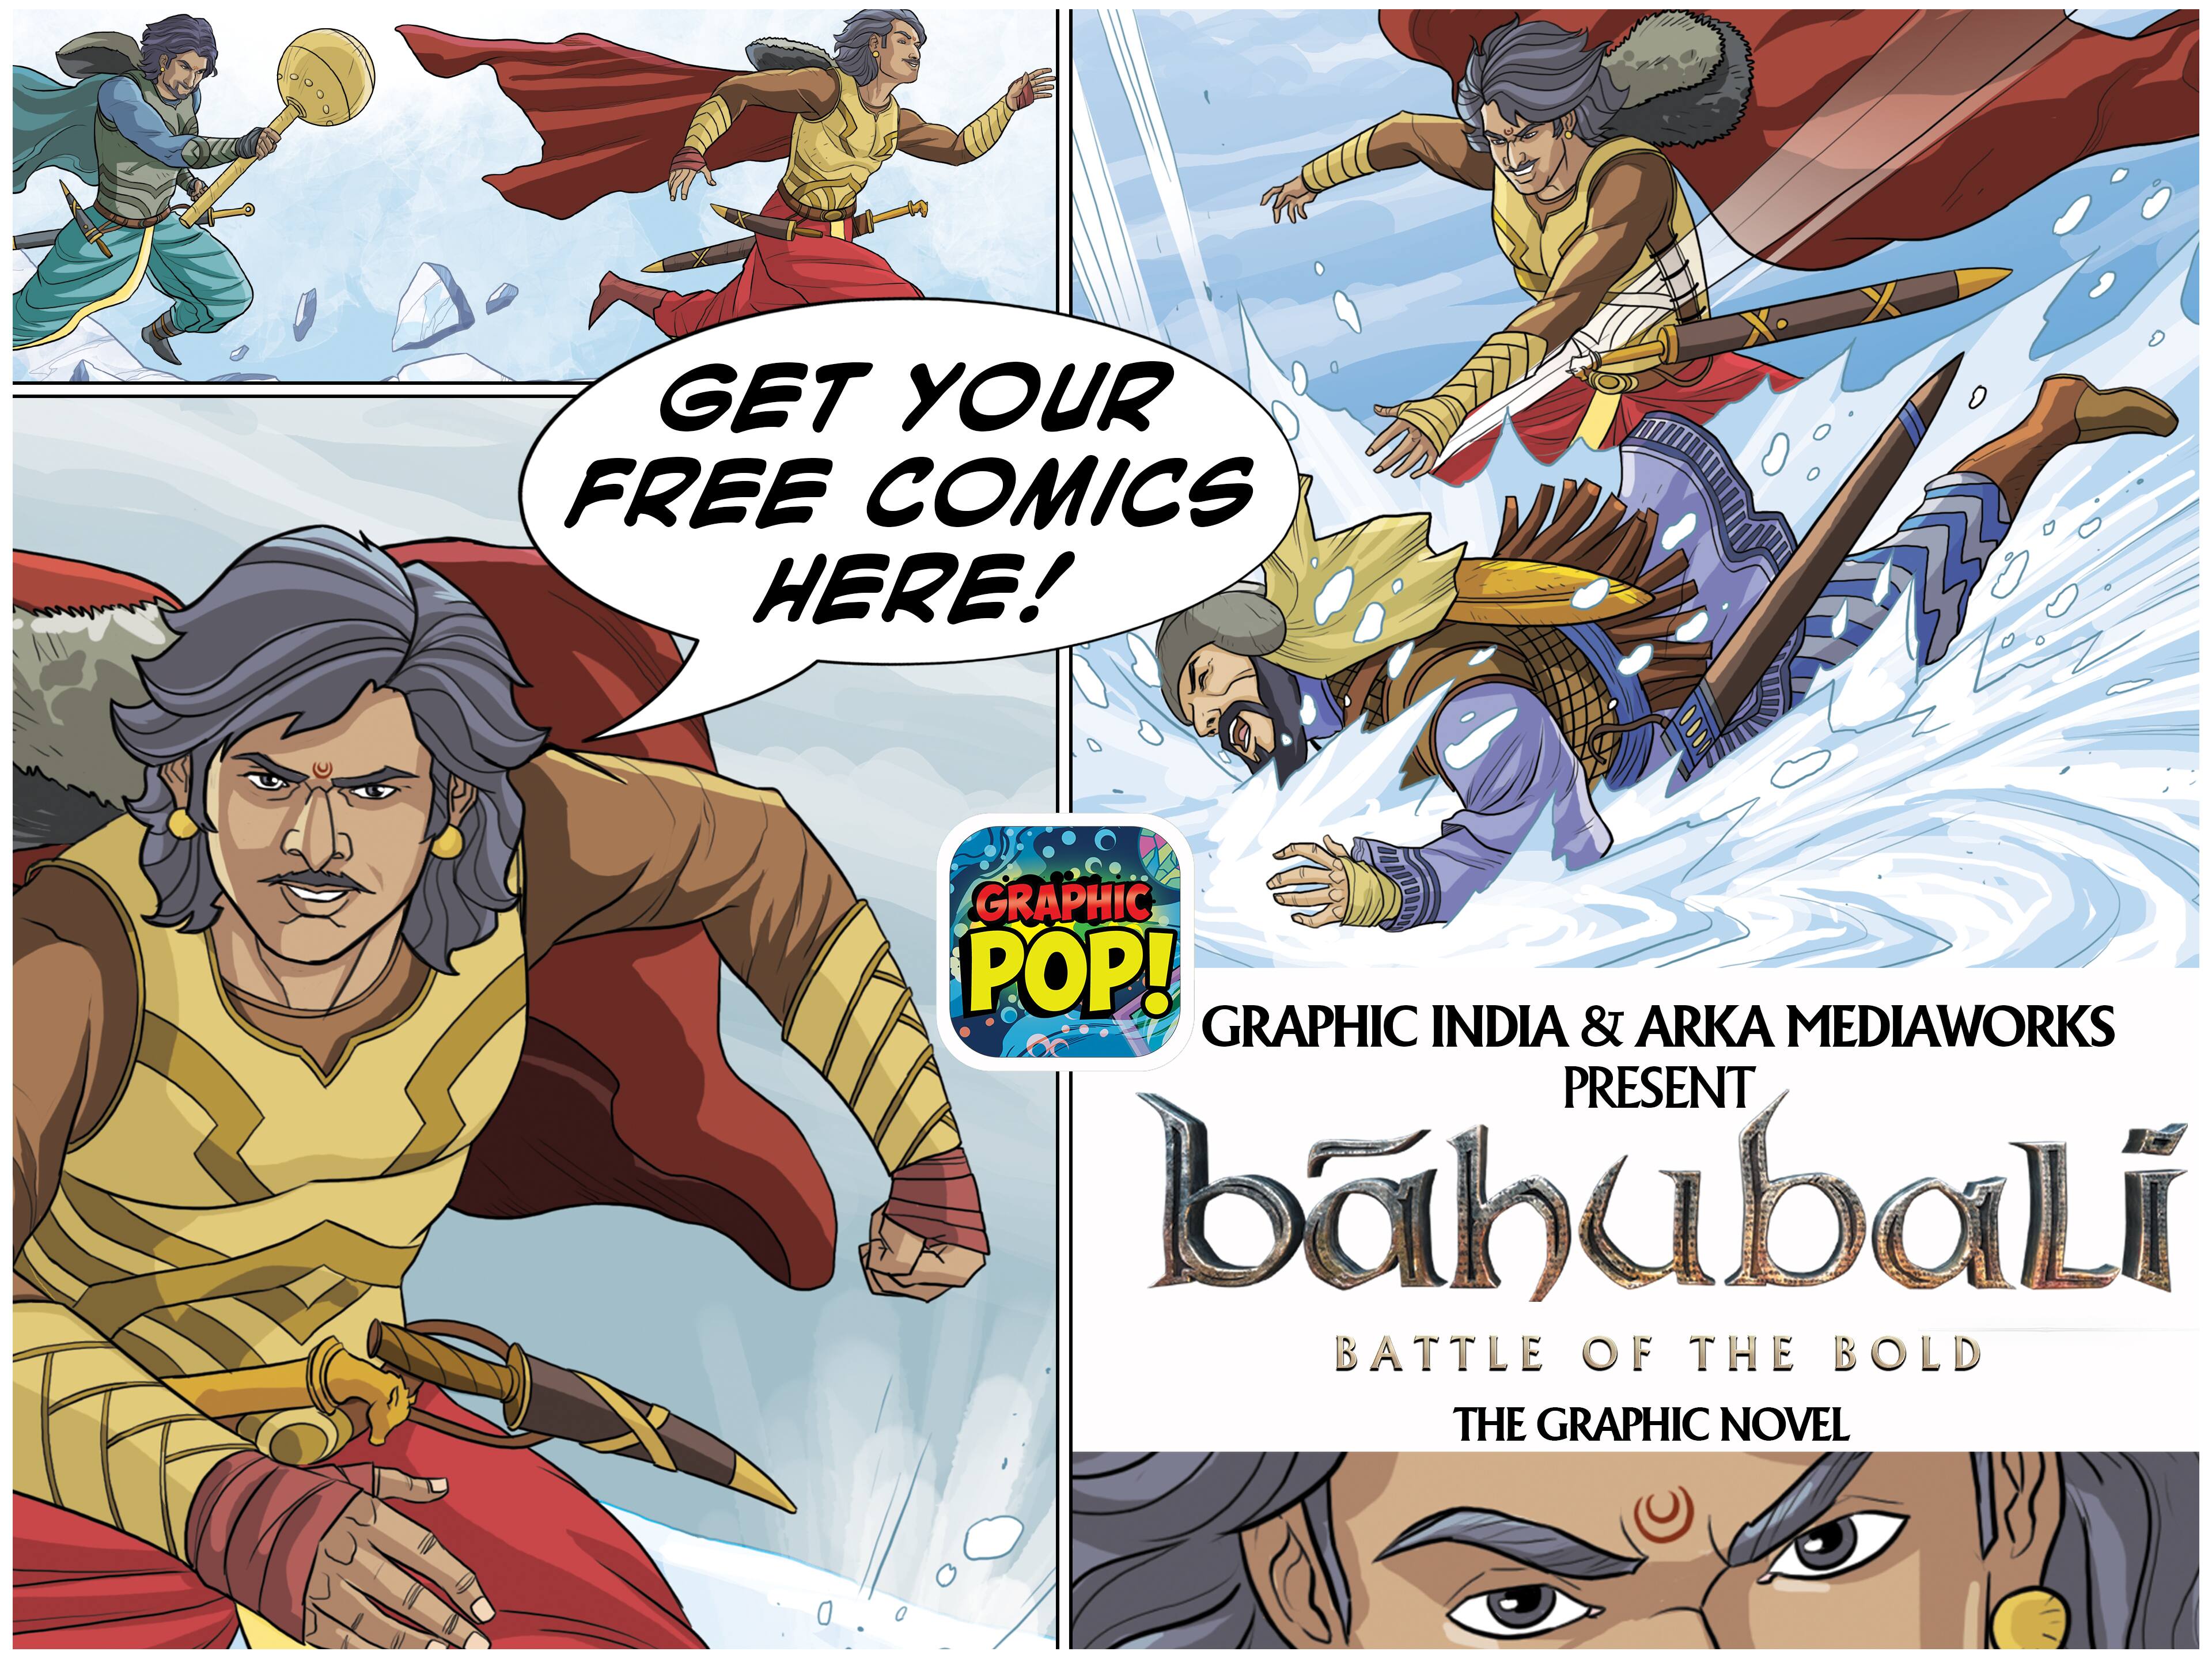 Baahubali turns into a graphic novel; download for free this week